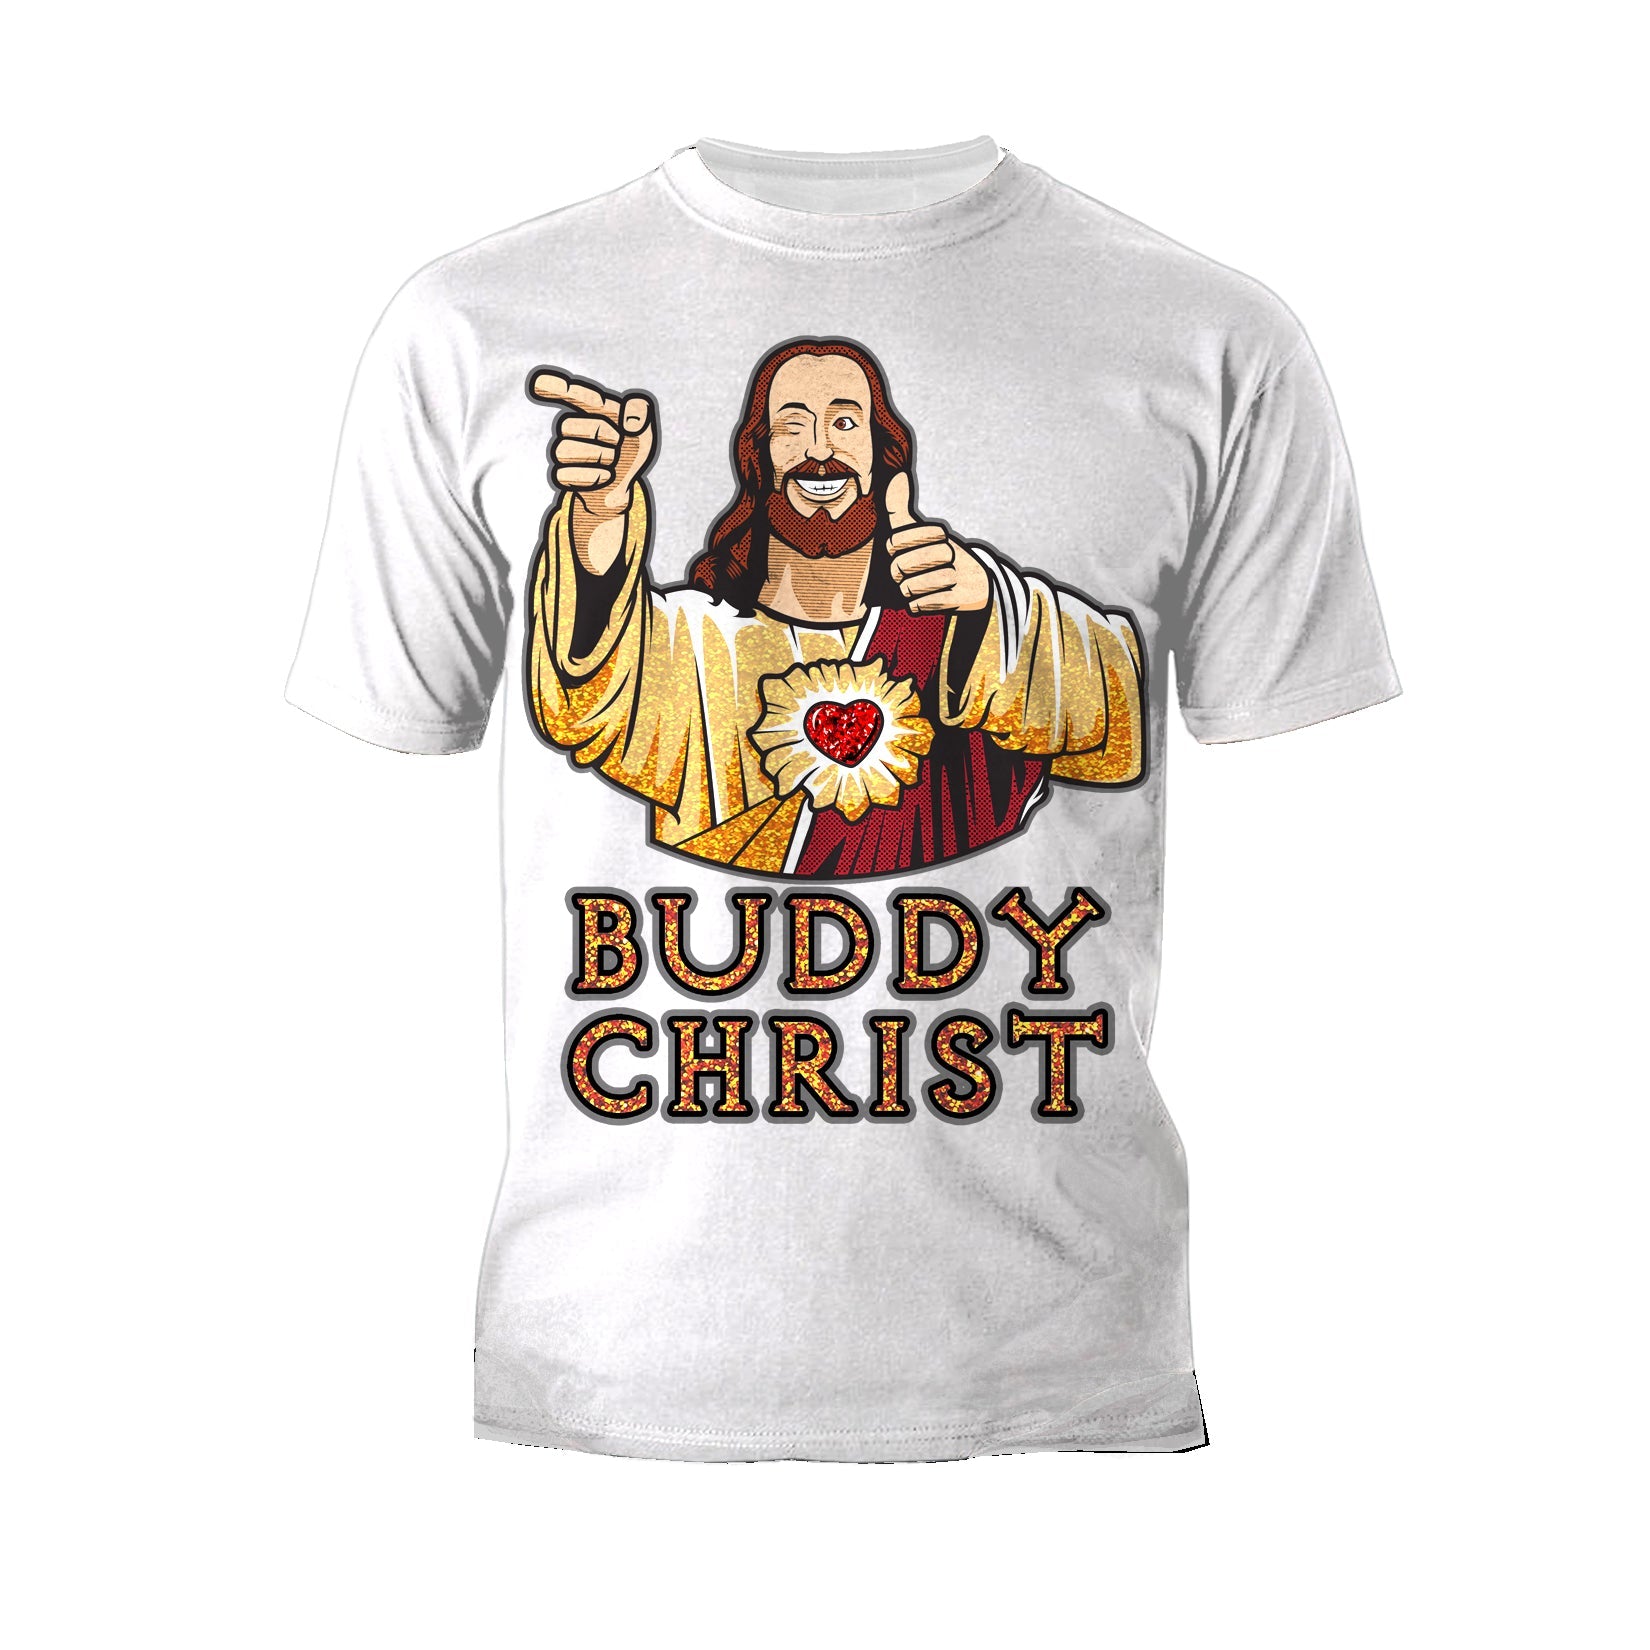 Kevin Smith View Askewniverse Buddy Christ Got Golden Wow Edition Official Men's T-Shirt